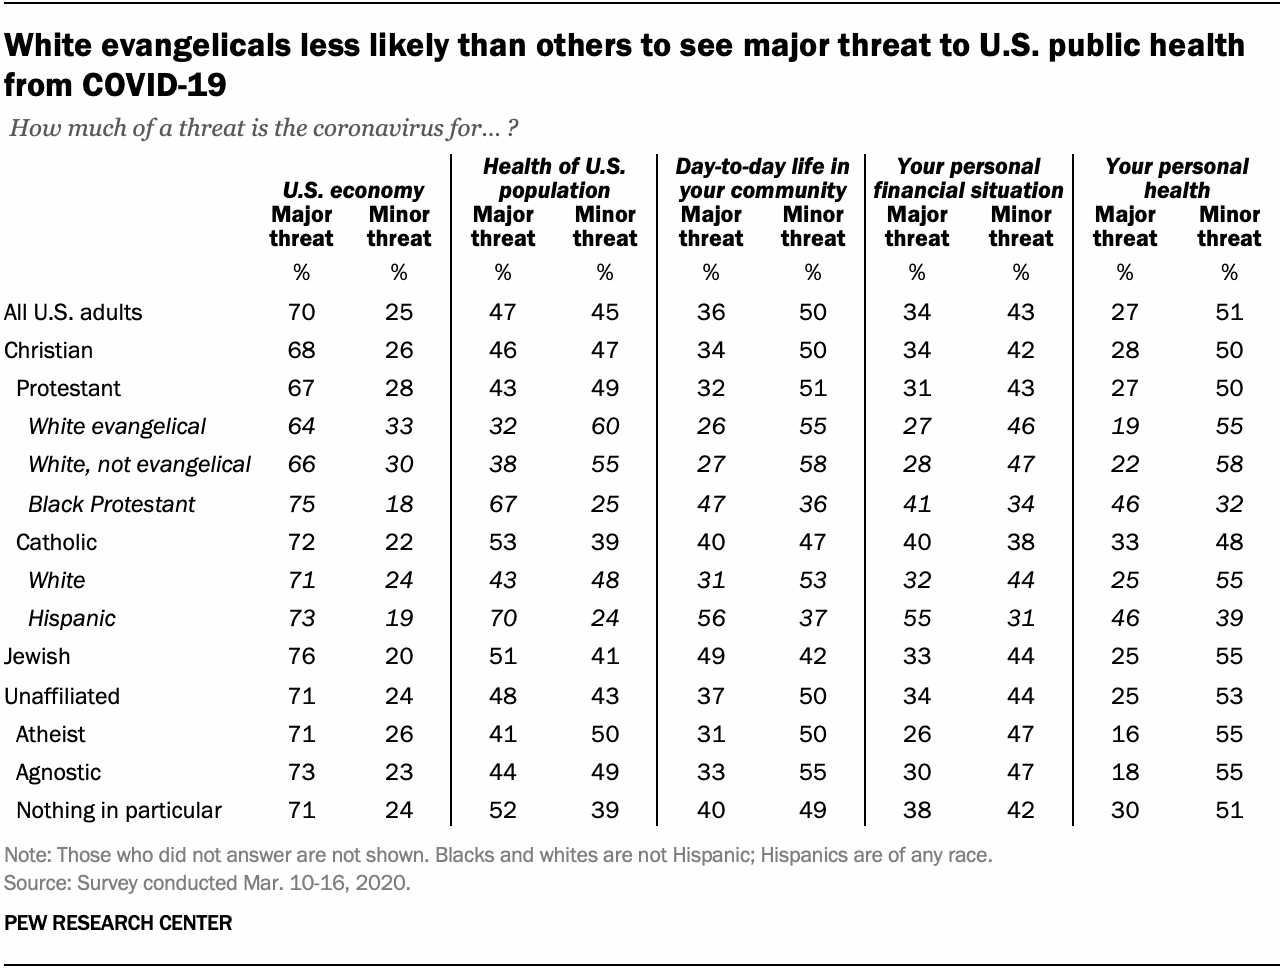 White evangelicals less likely than others to see major threat to U.S. public health from COVID-19